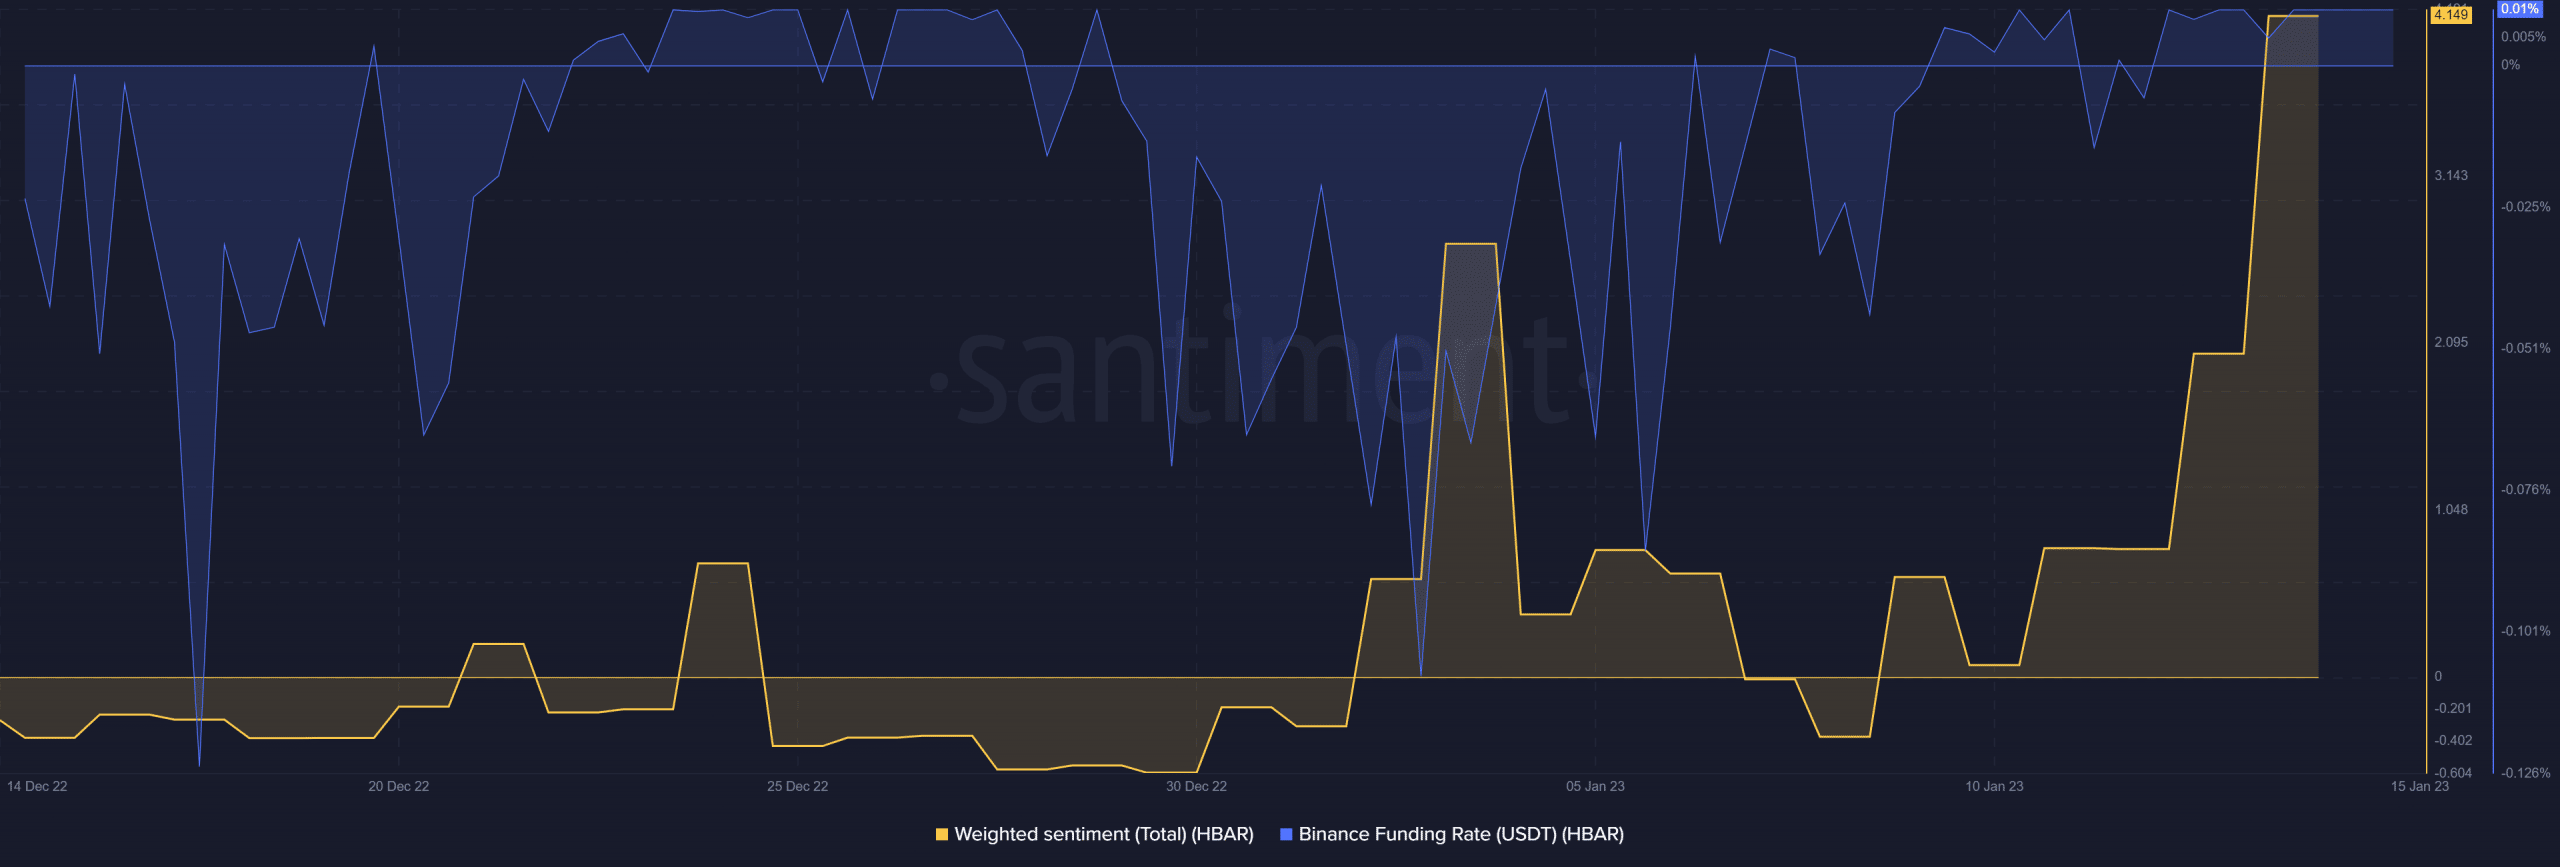 HBAR weighted sentiment and Binance funding rate